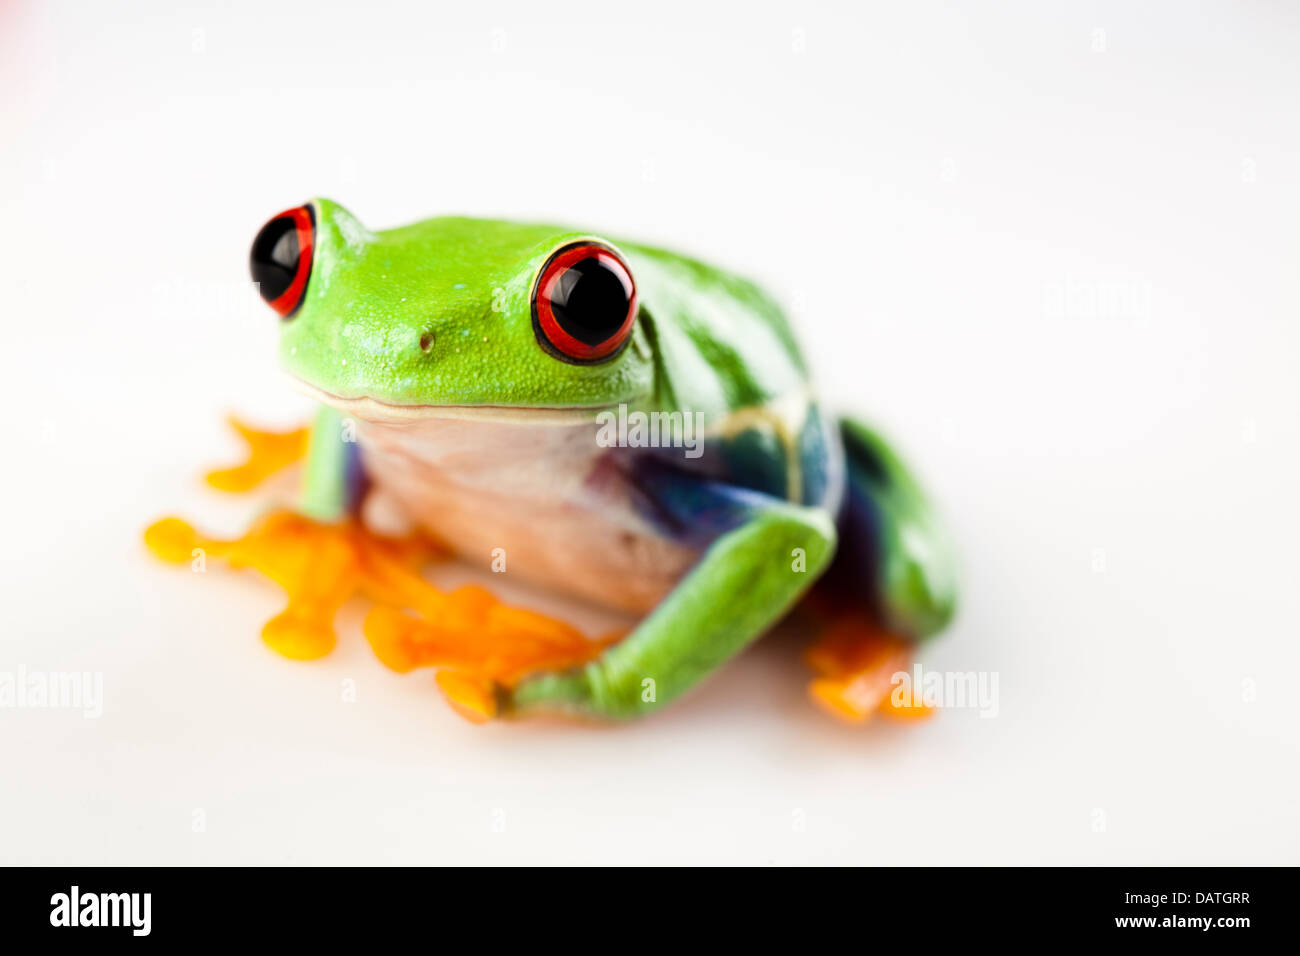 Piccolo animale red eyed frog Foto Stock